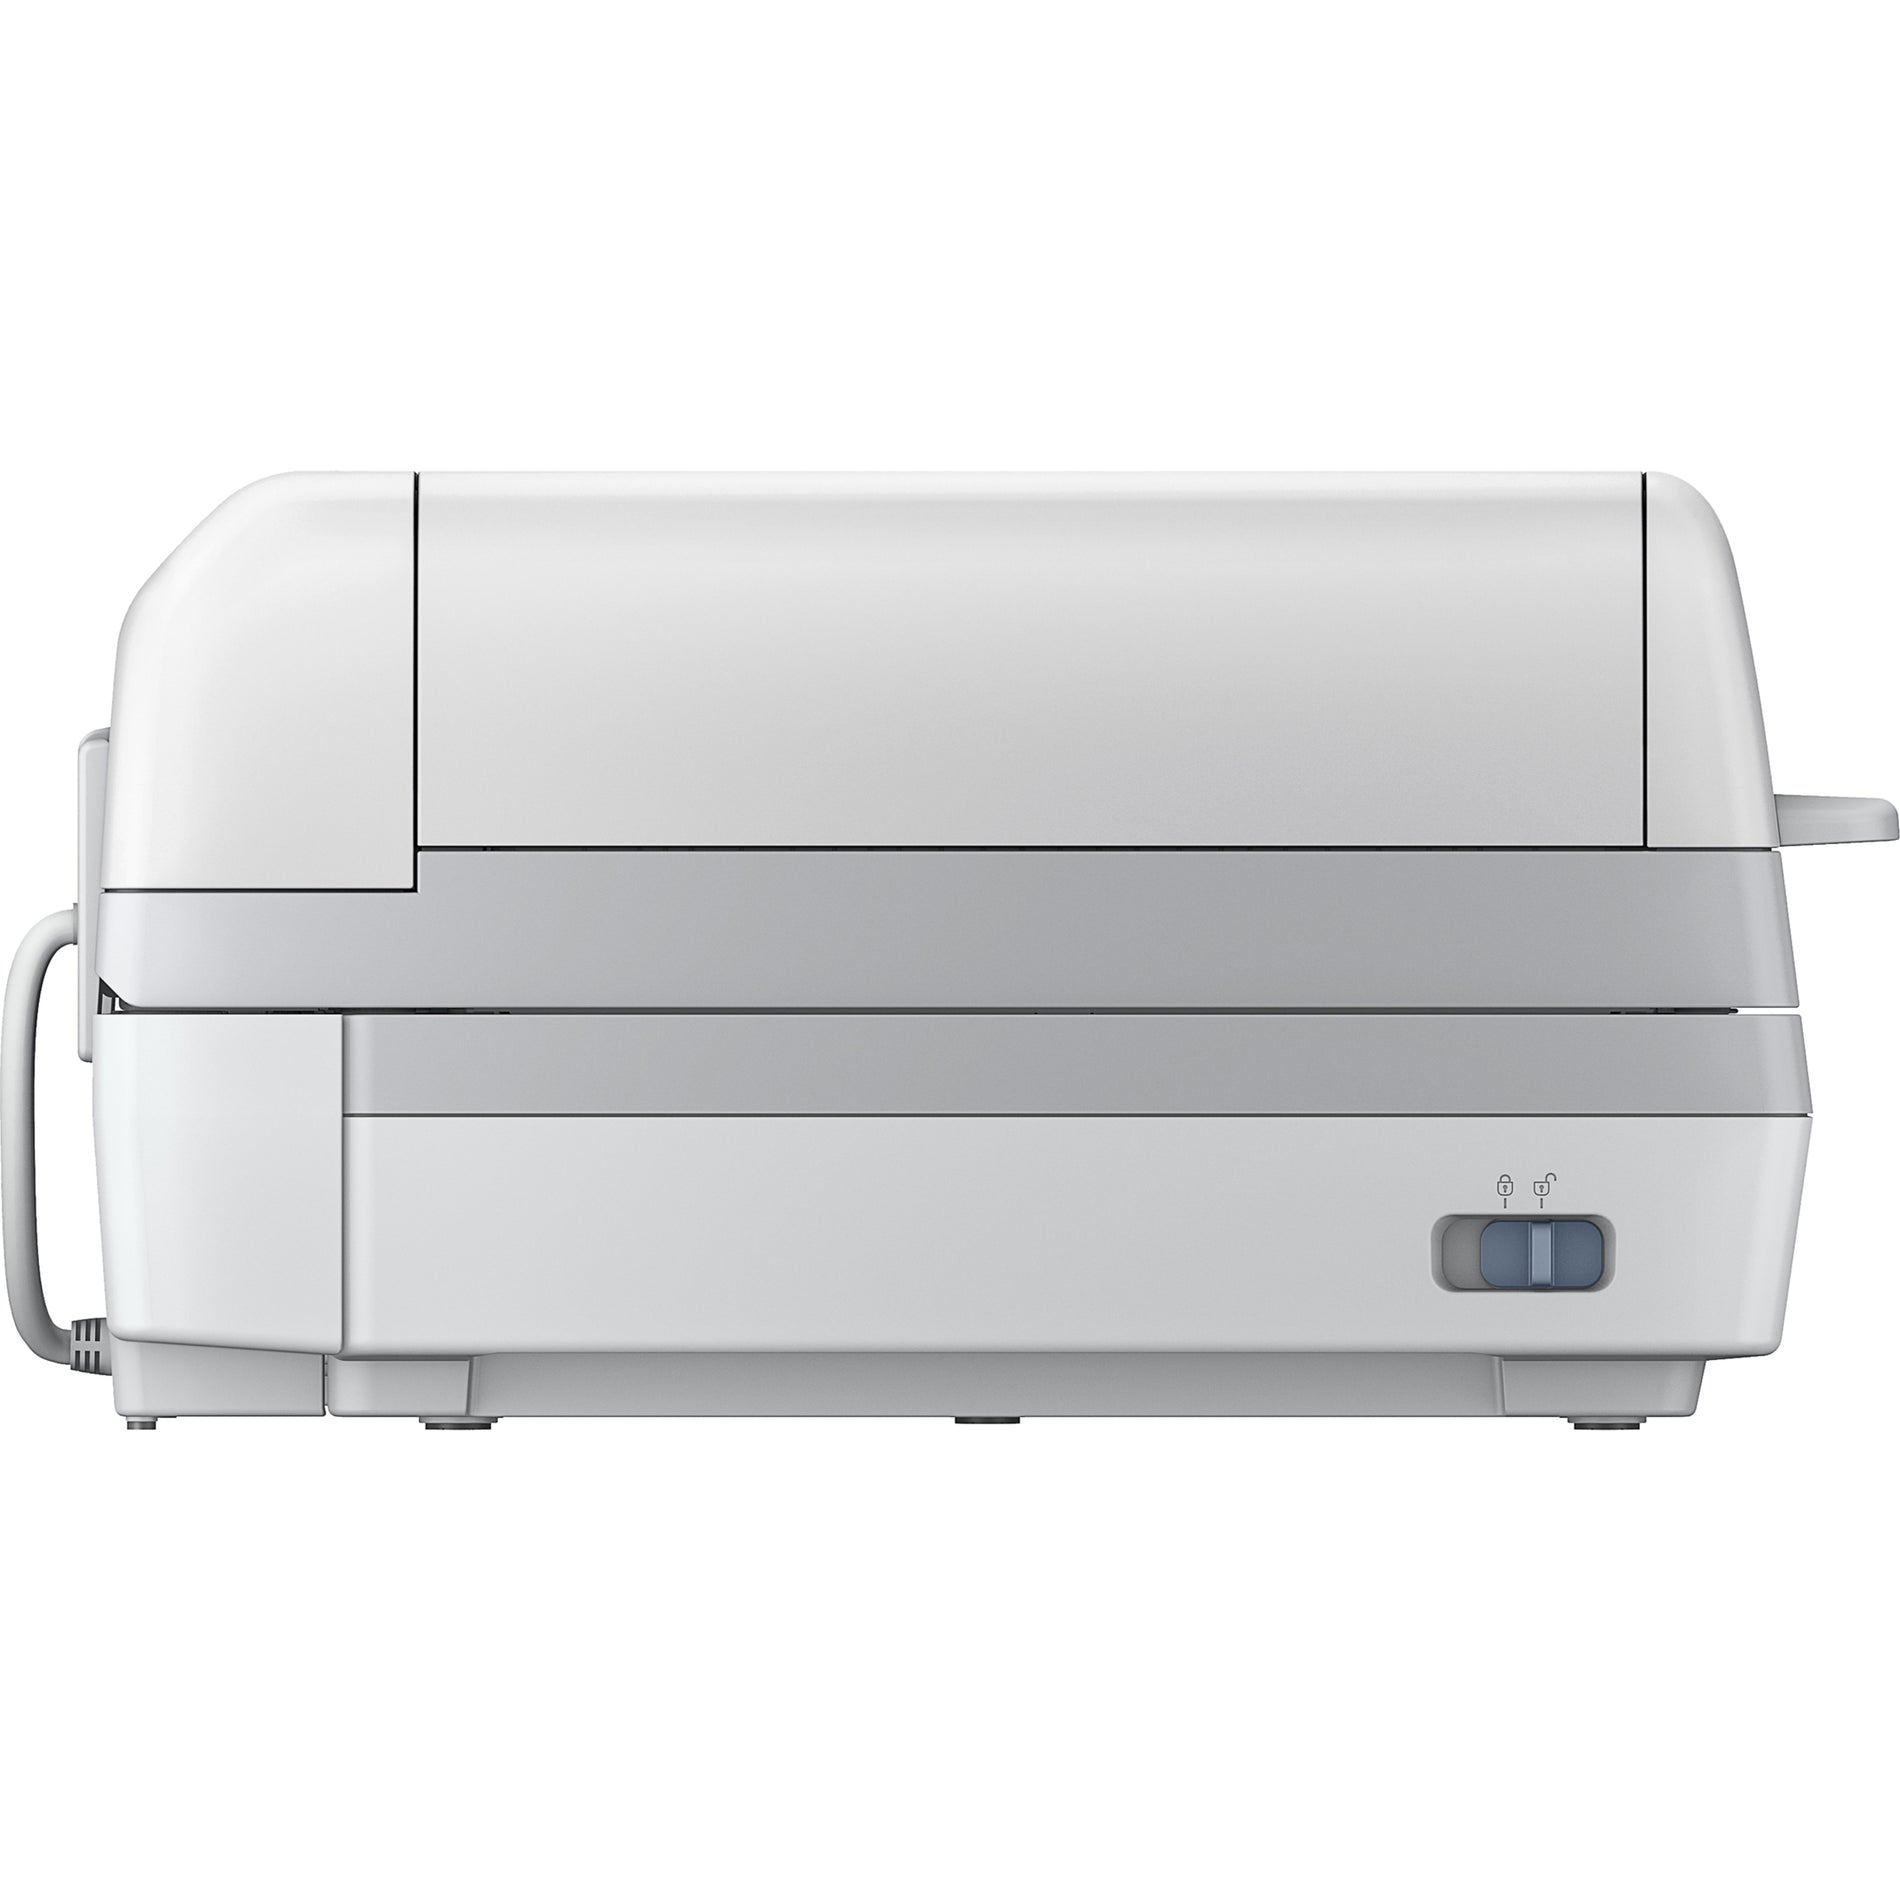 Epson B11B204221 WorkForce DS-60000 Document Scanner, High-Speed Color Scanning for Windows and Mac